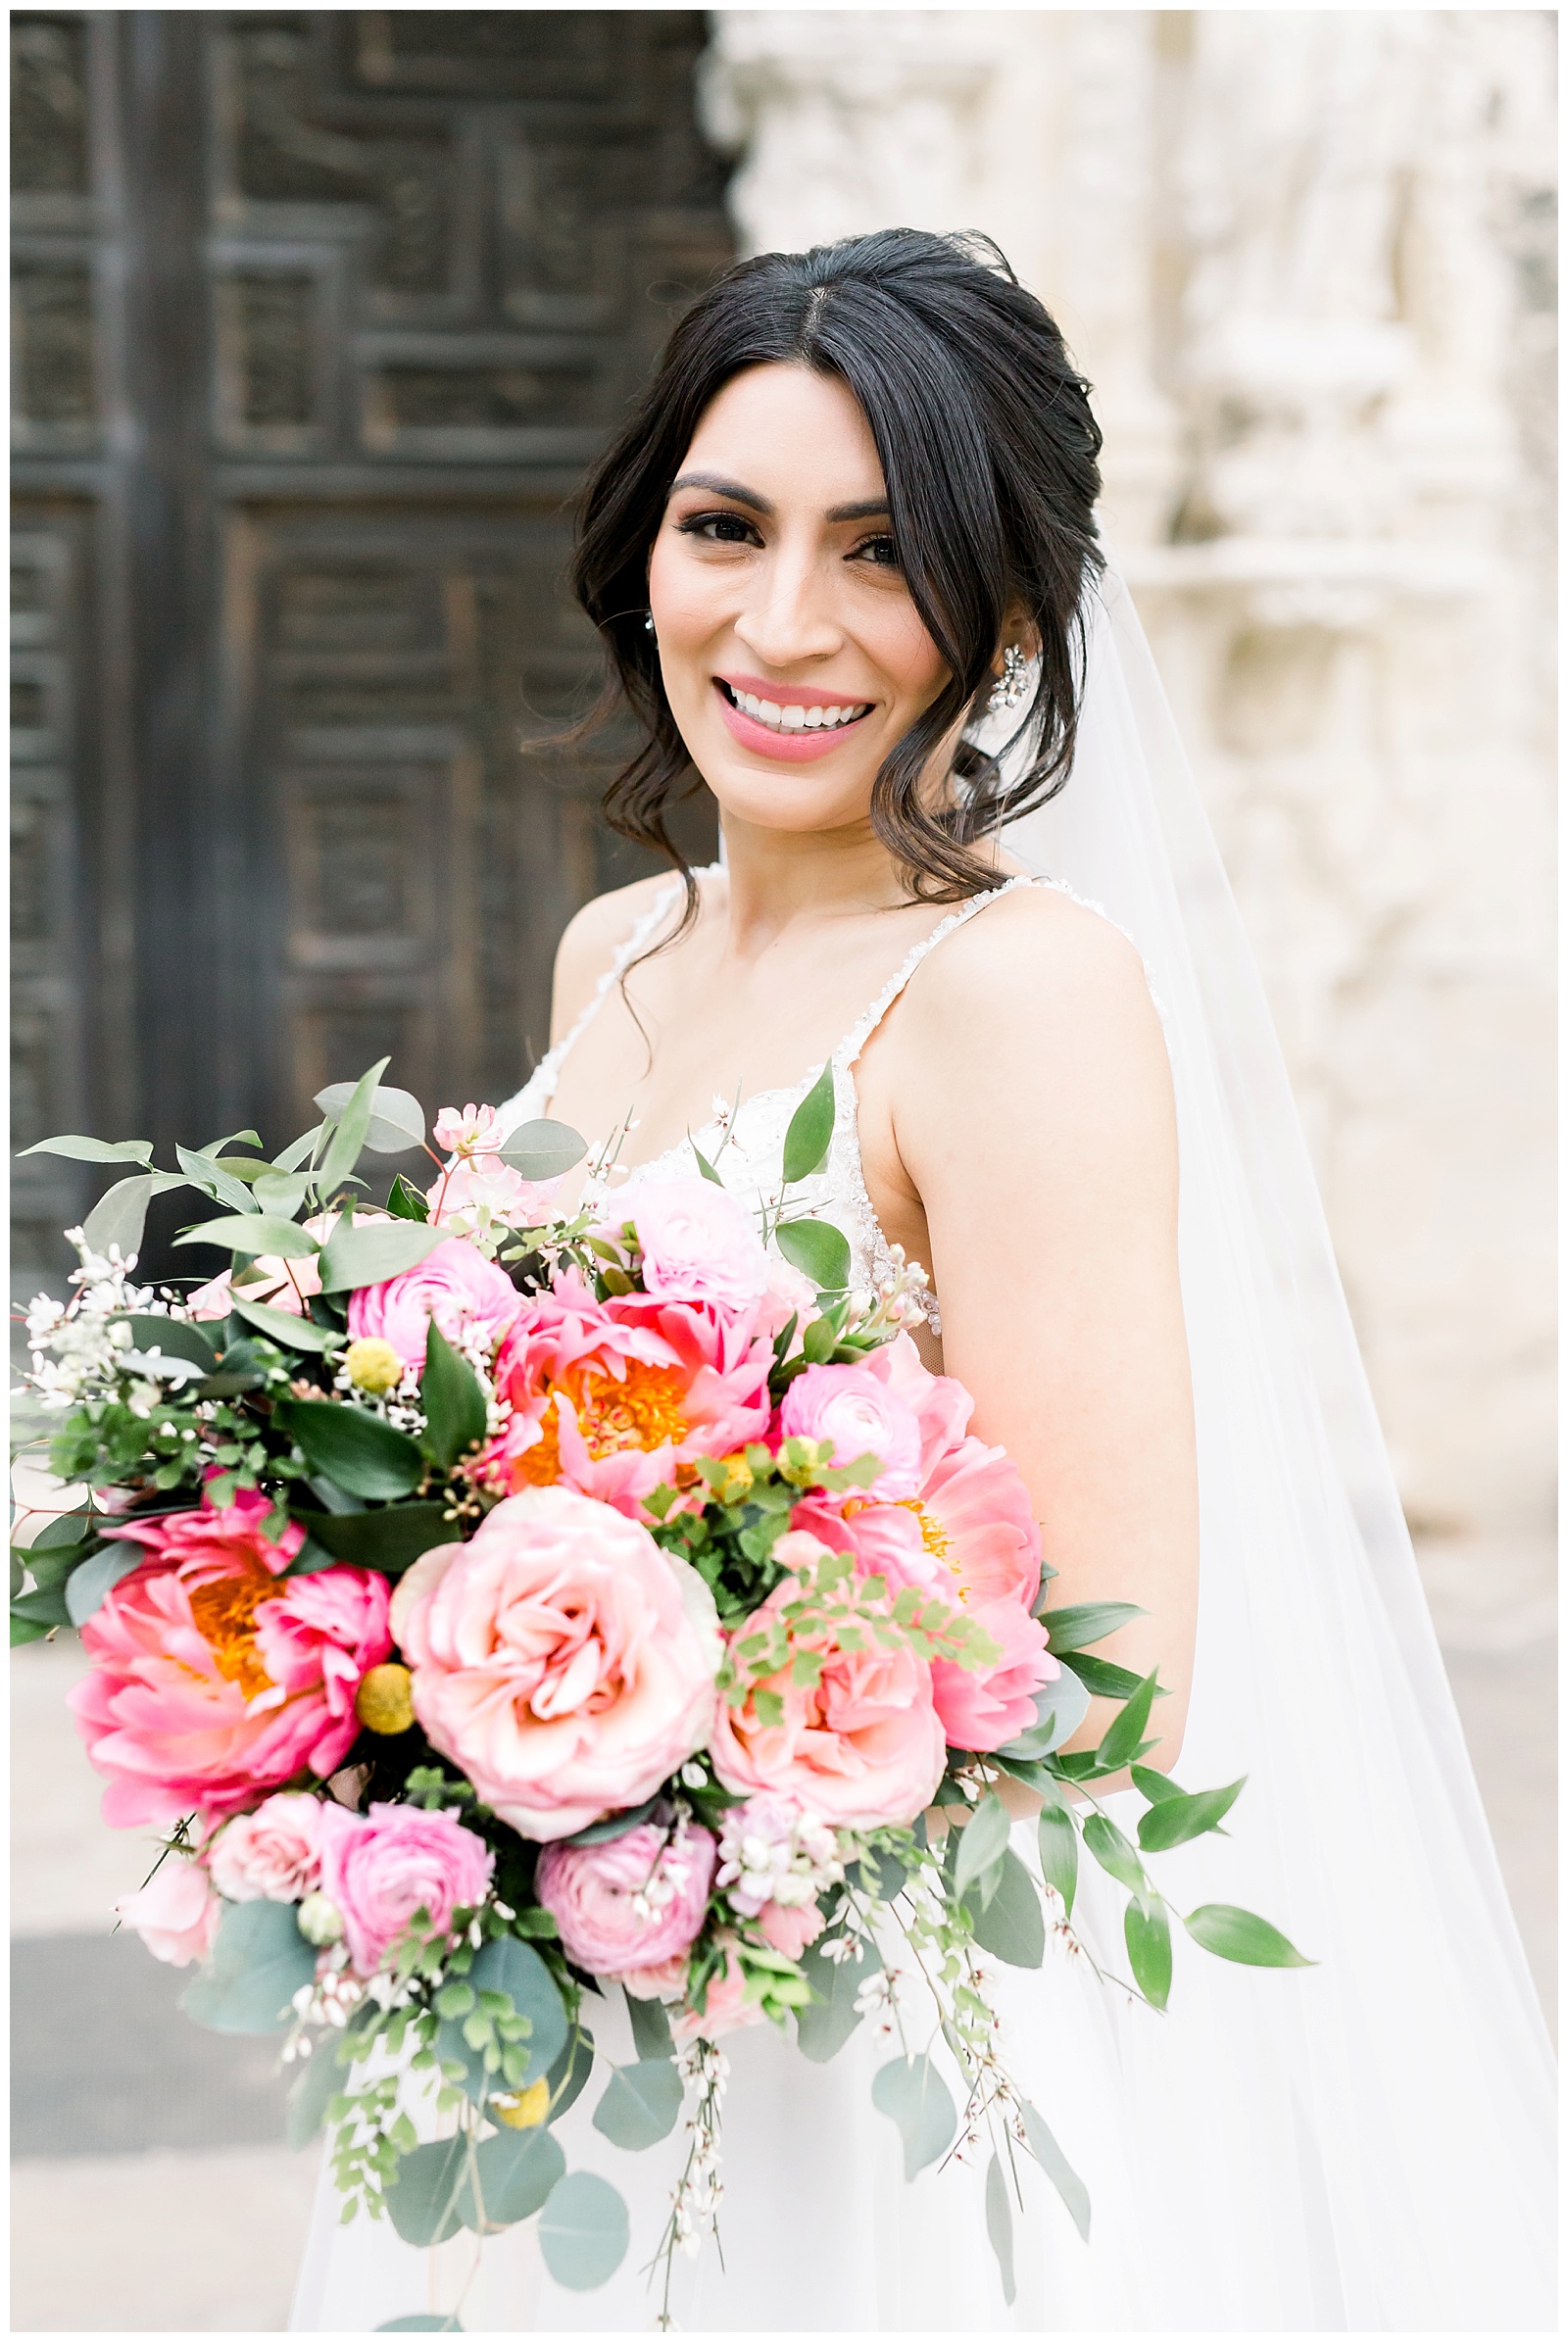 Bride smiling for her Spanish Missions Bridal Portraits in San Antonio, TX with Monica Roberts Photography | www.monicaroberts.com